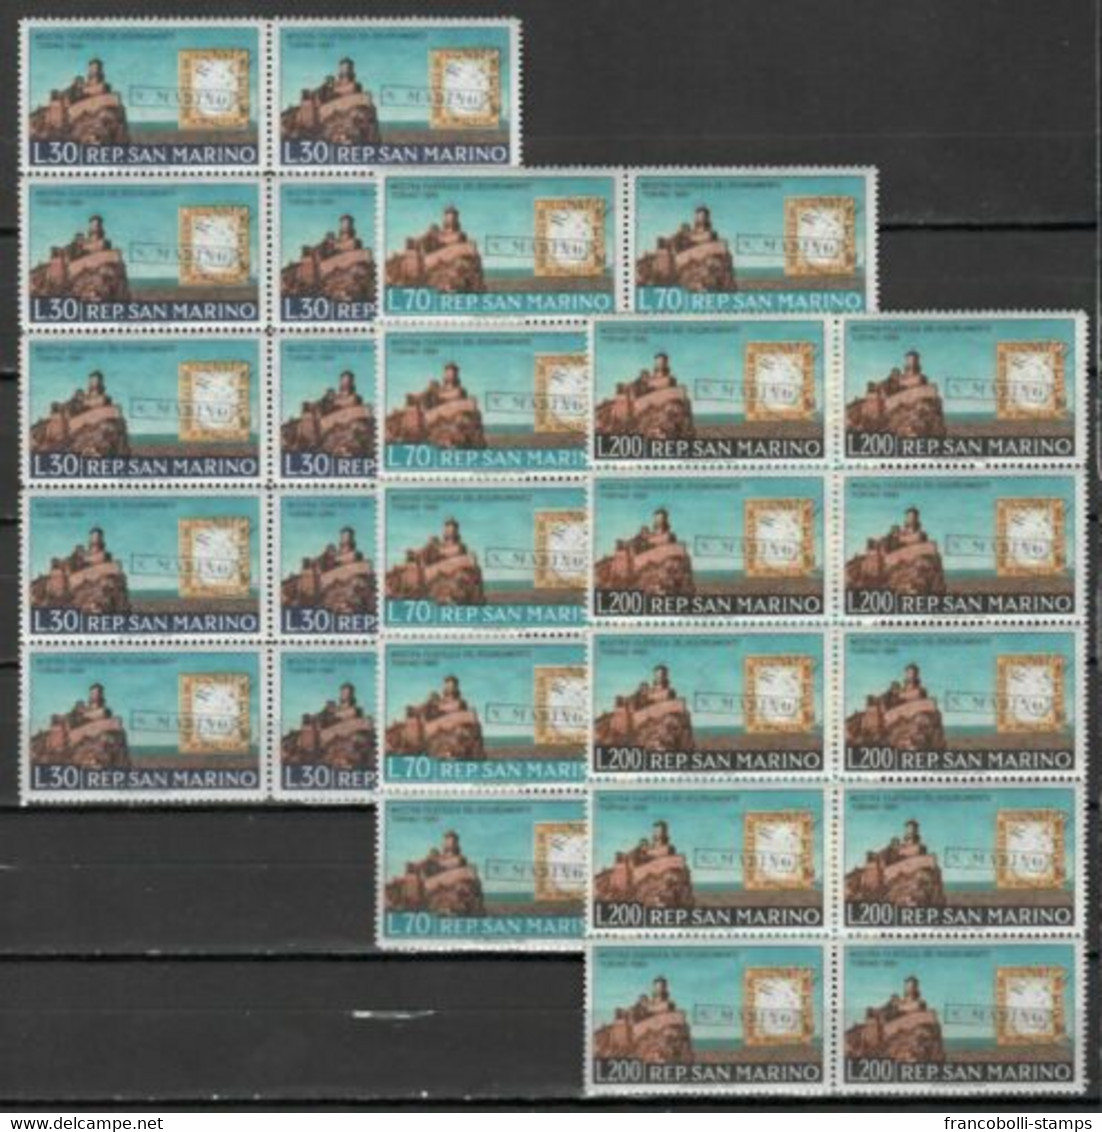 S32737 DEALER STOCK SAN MARINO MNH 1961 Risorgimento Stamps On Stamps 3v 10 SETS - Collections, Lots & Séries